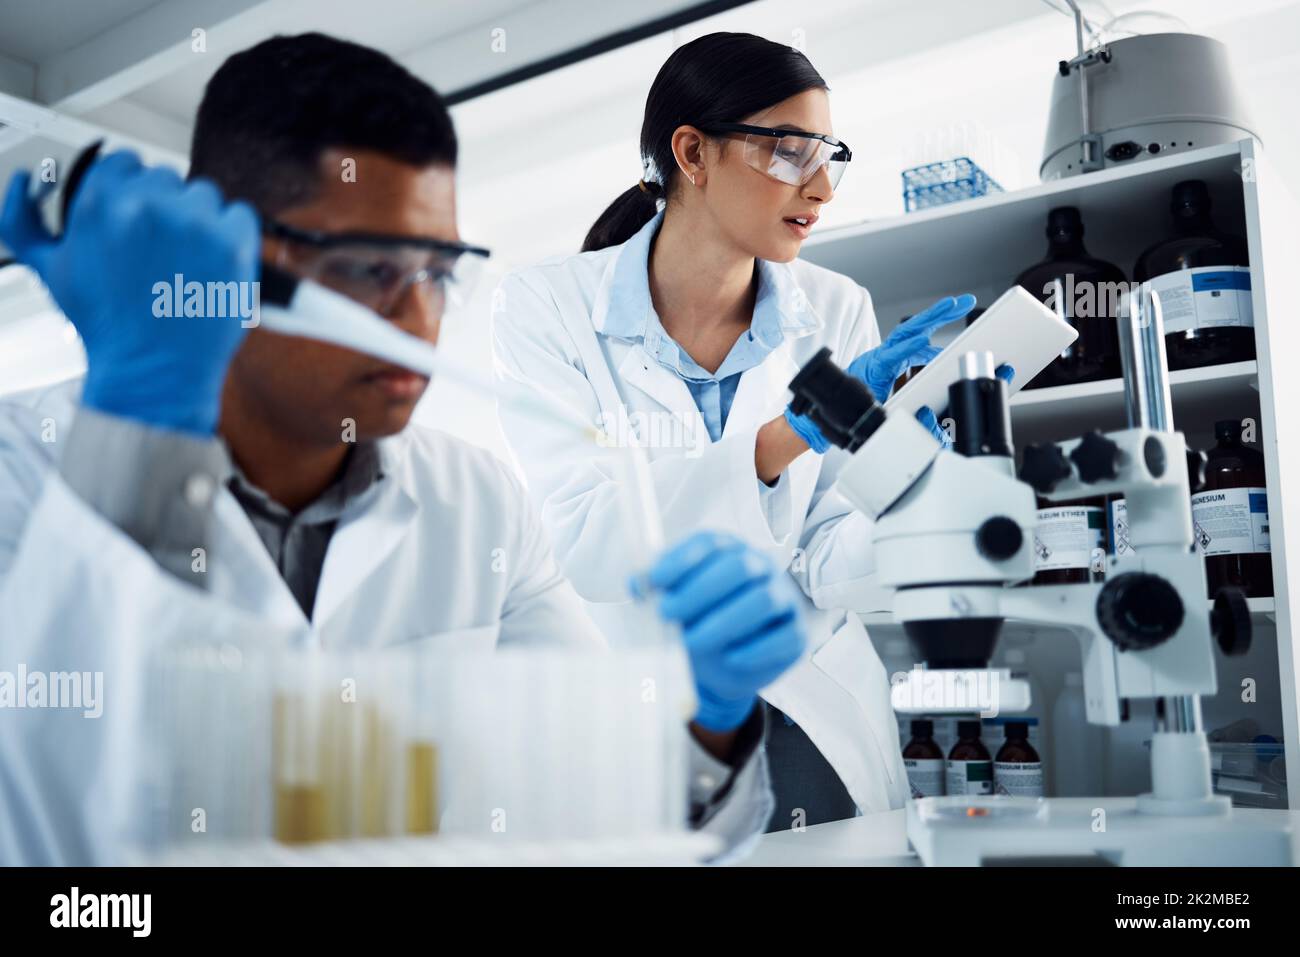 Hard at work in the name of health. Shot of two young scientists using a digital tablet while conducting medical research in a laboratory. Stock Photo